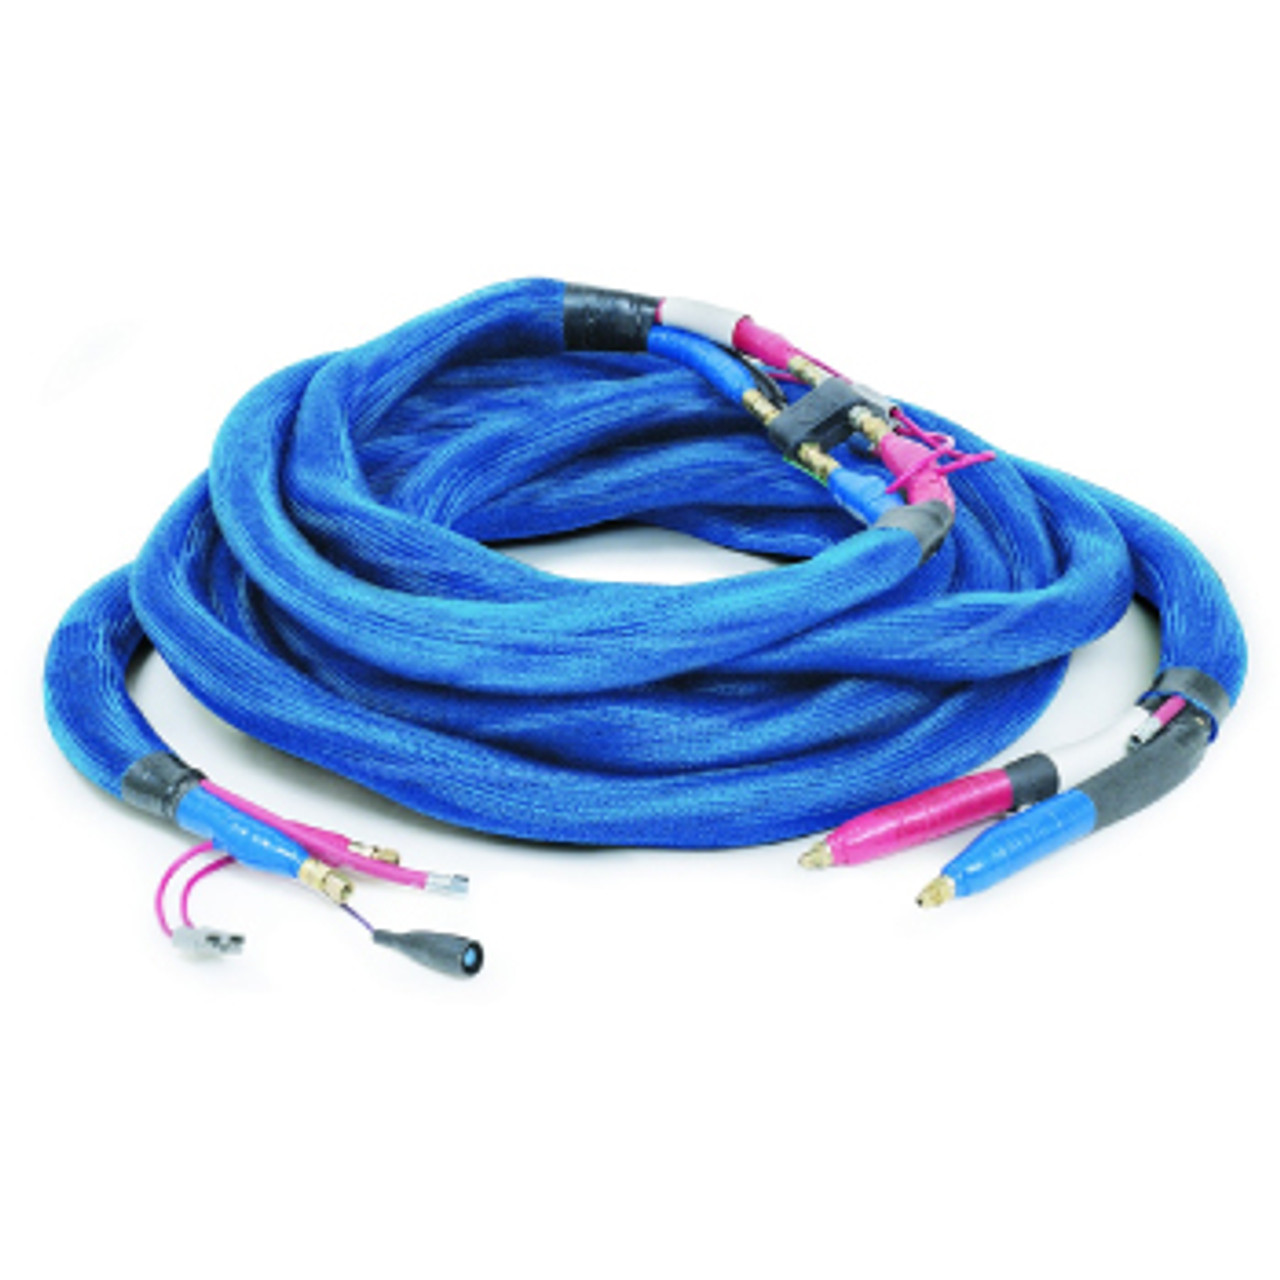 Graco 50' Heated Hose with Scuff Guard (Low & High)